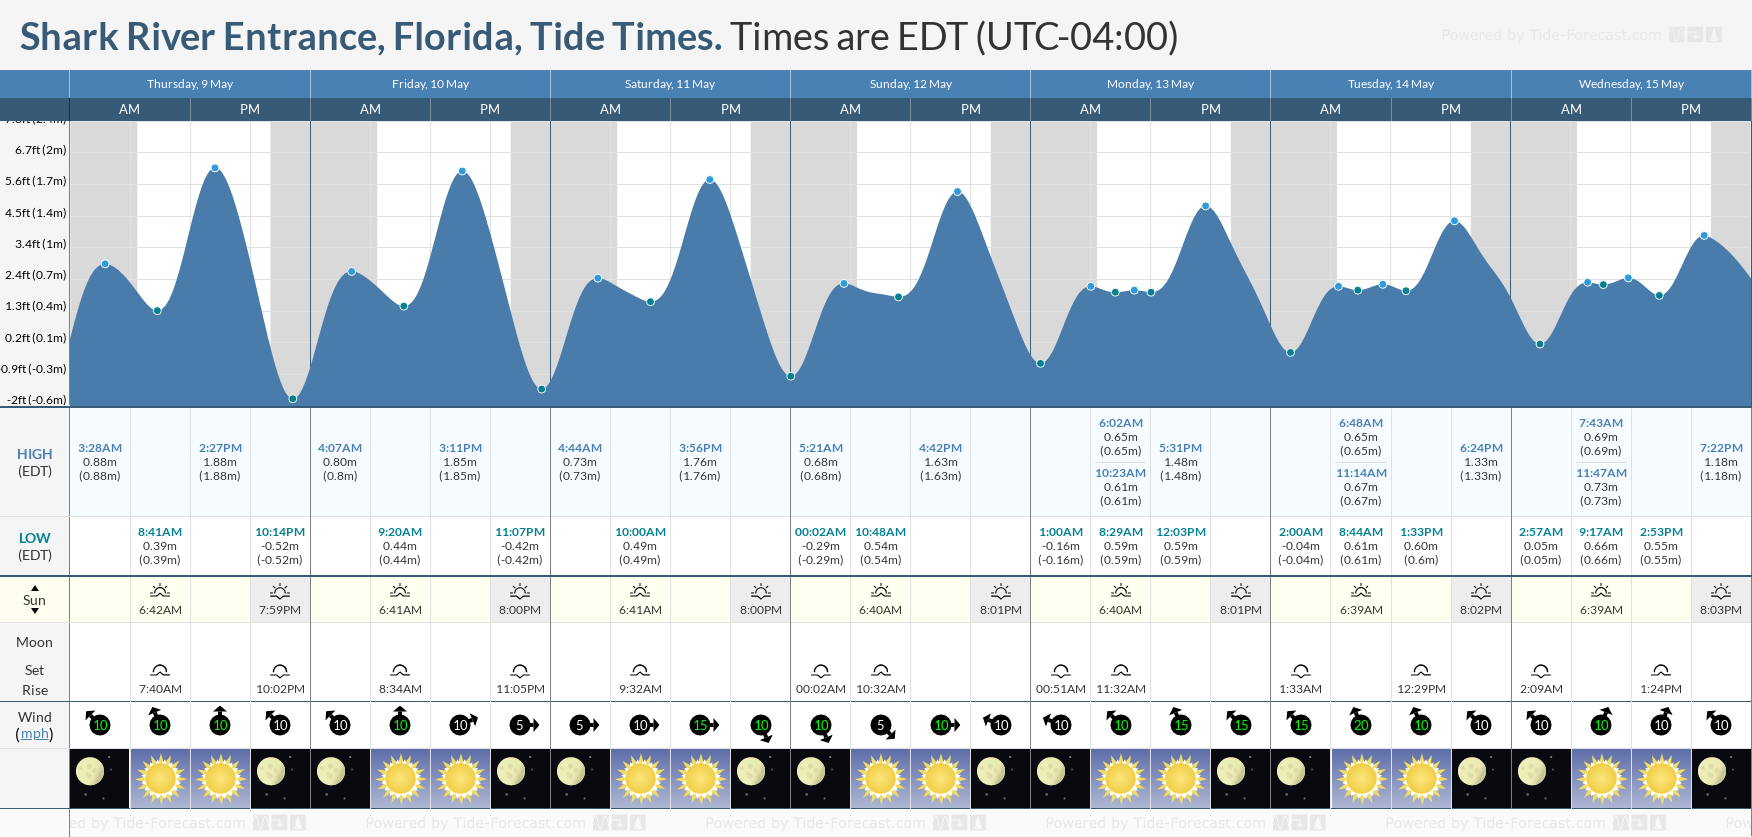 Shark River Entrance, Florida Tide Chart including high and low tide times for the next 7 days